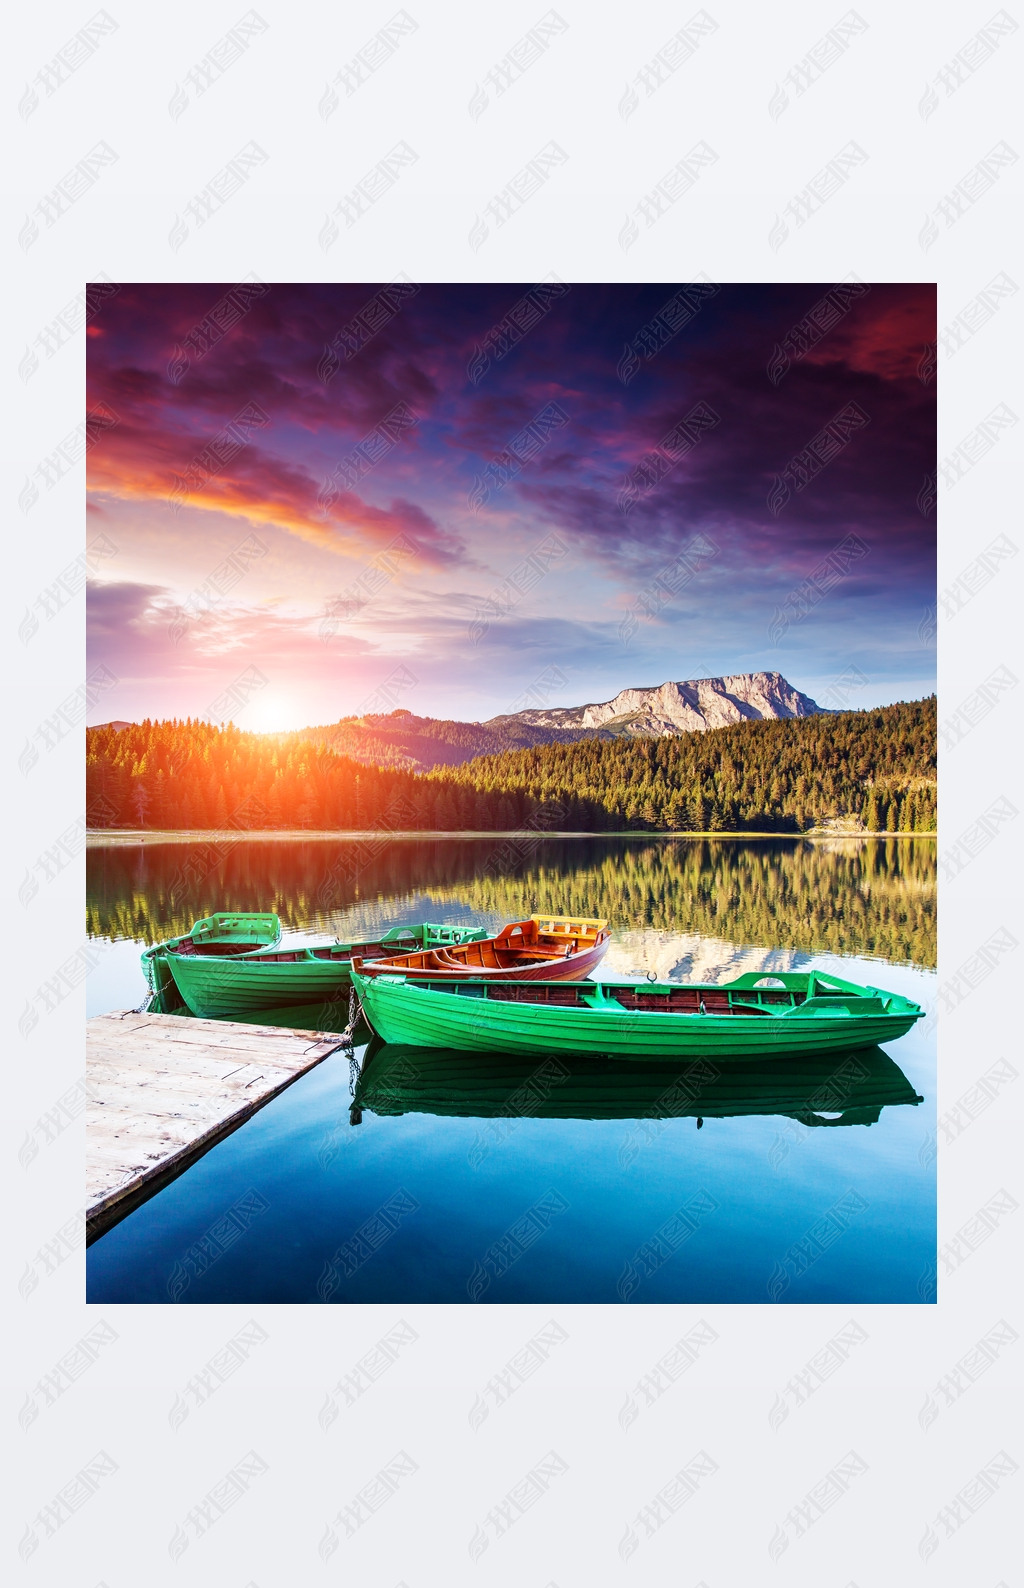 Boats on Black lake in Durmitor national park